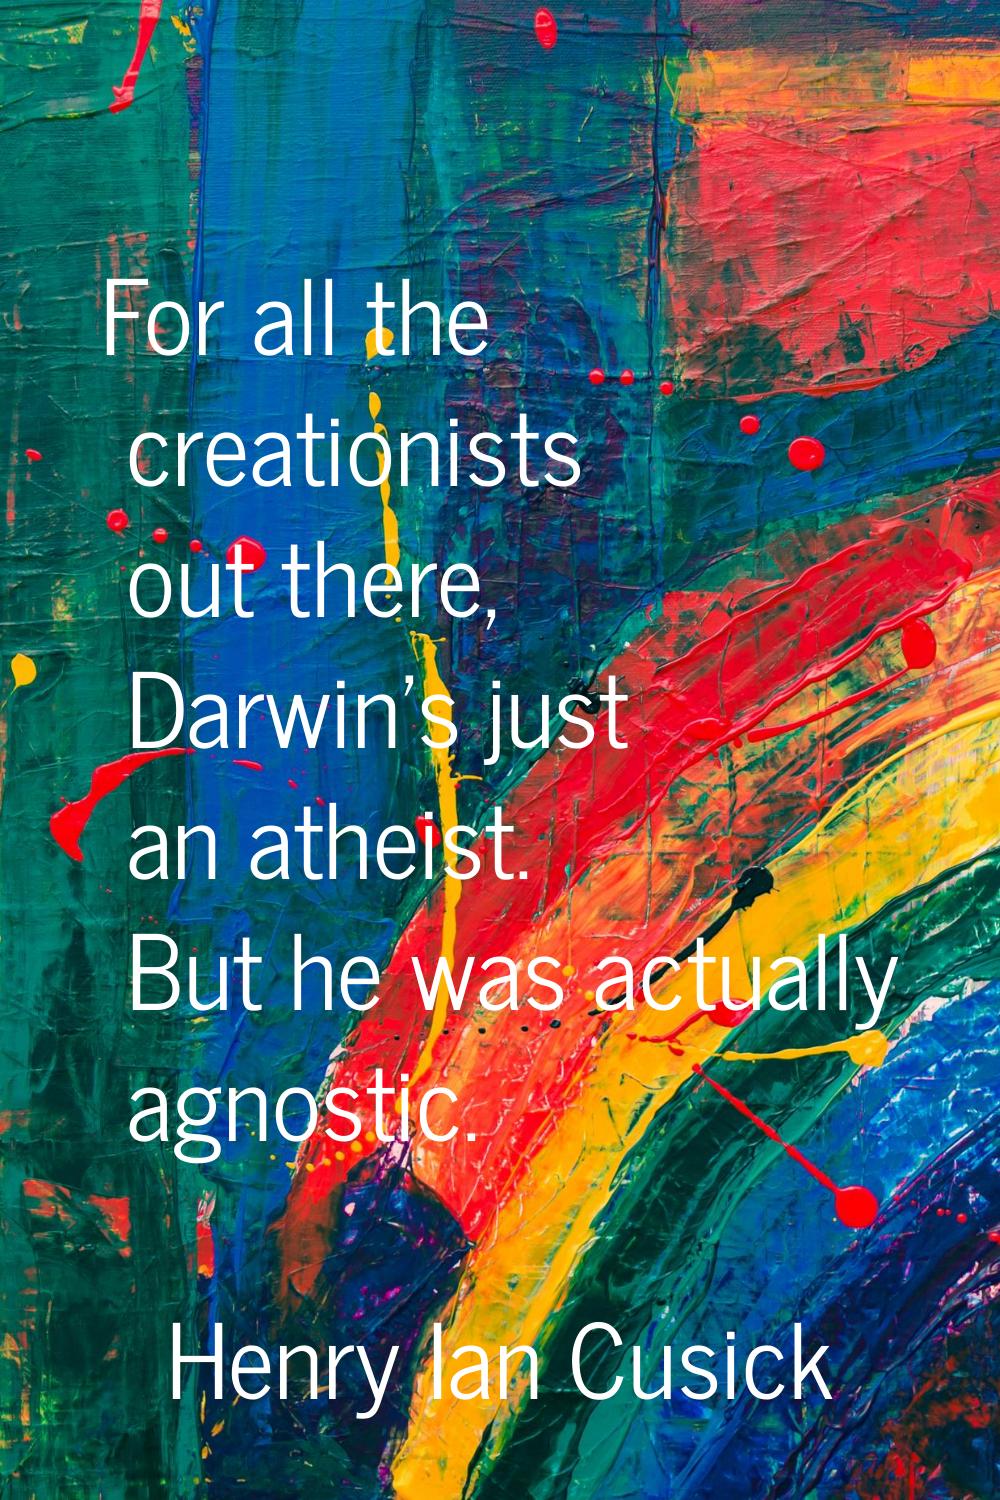 For all the creationists out there, Darwin's just an atheist. But he was actually agnostic.